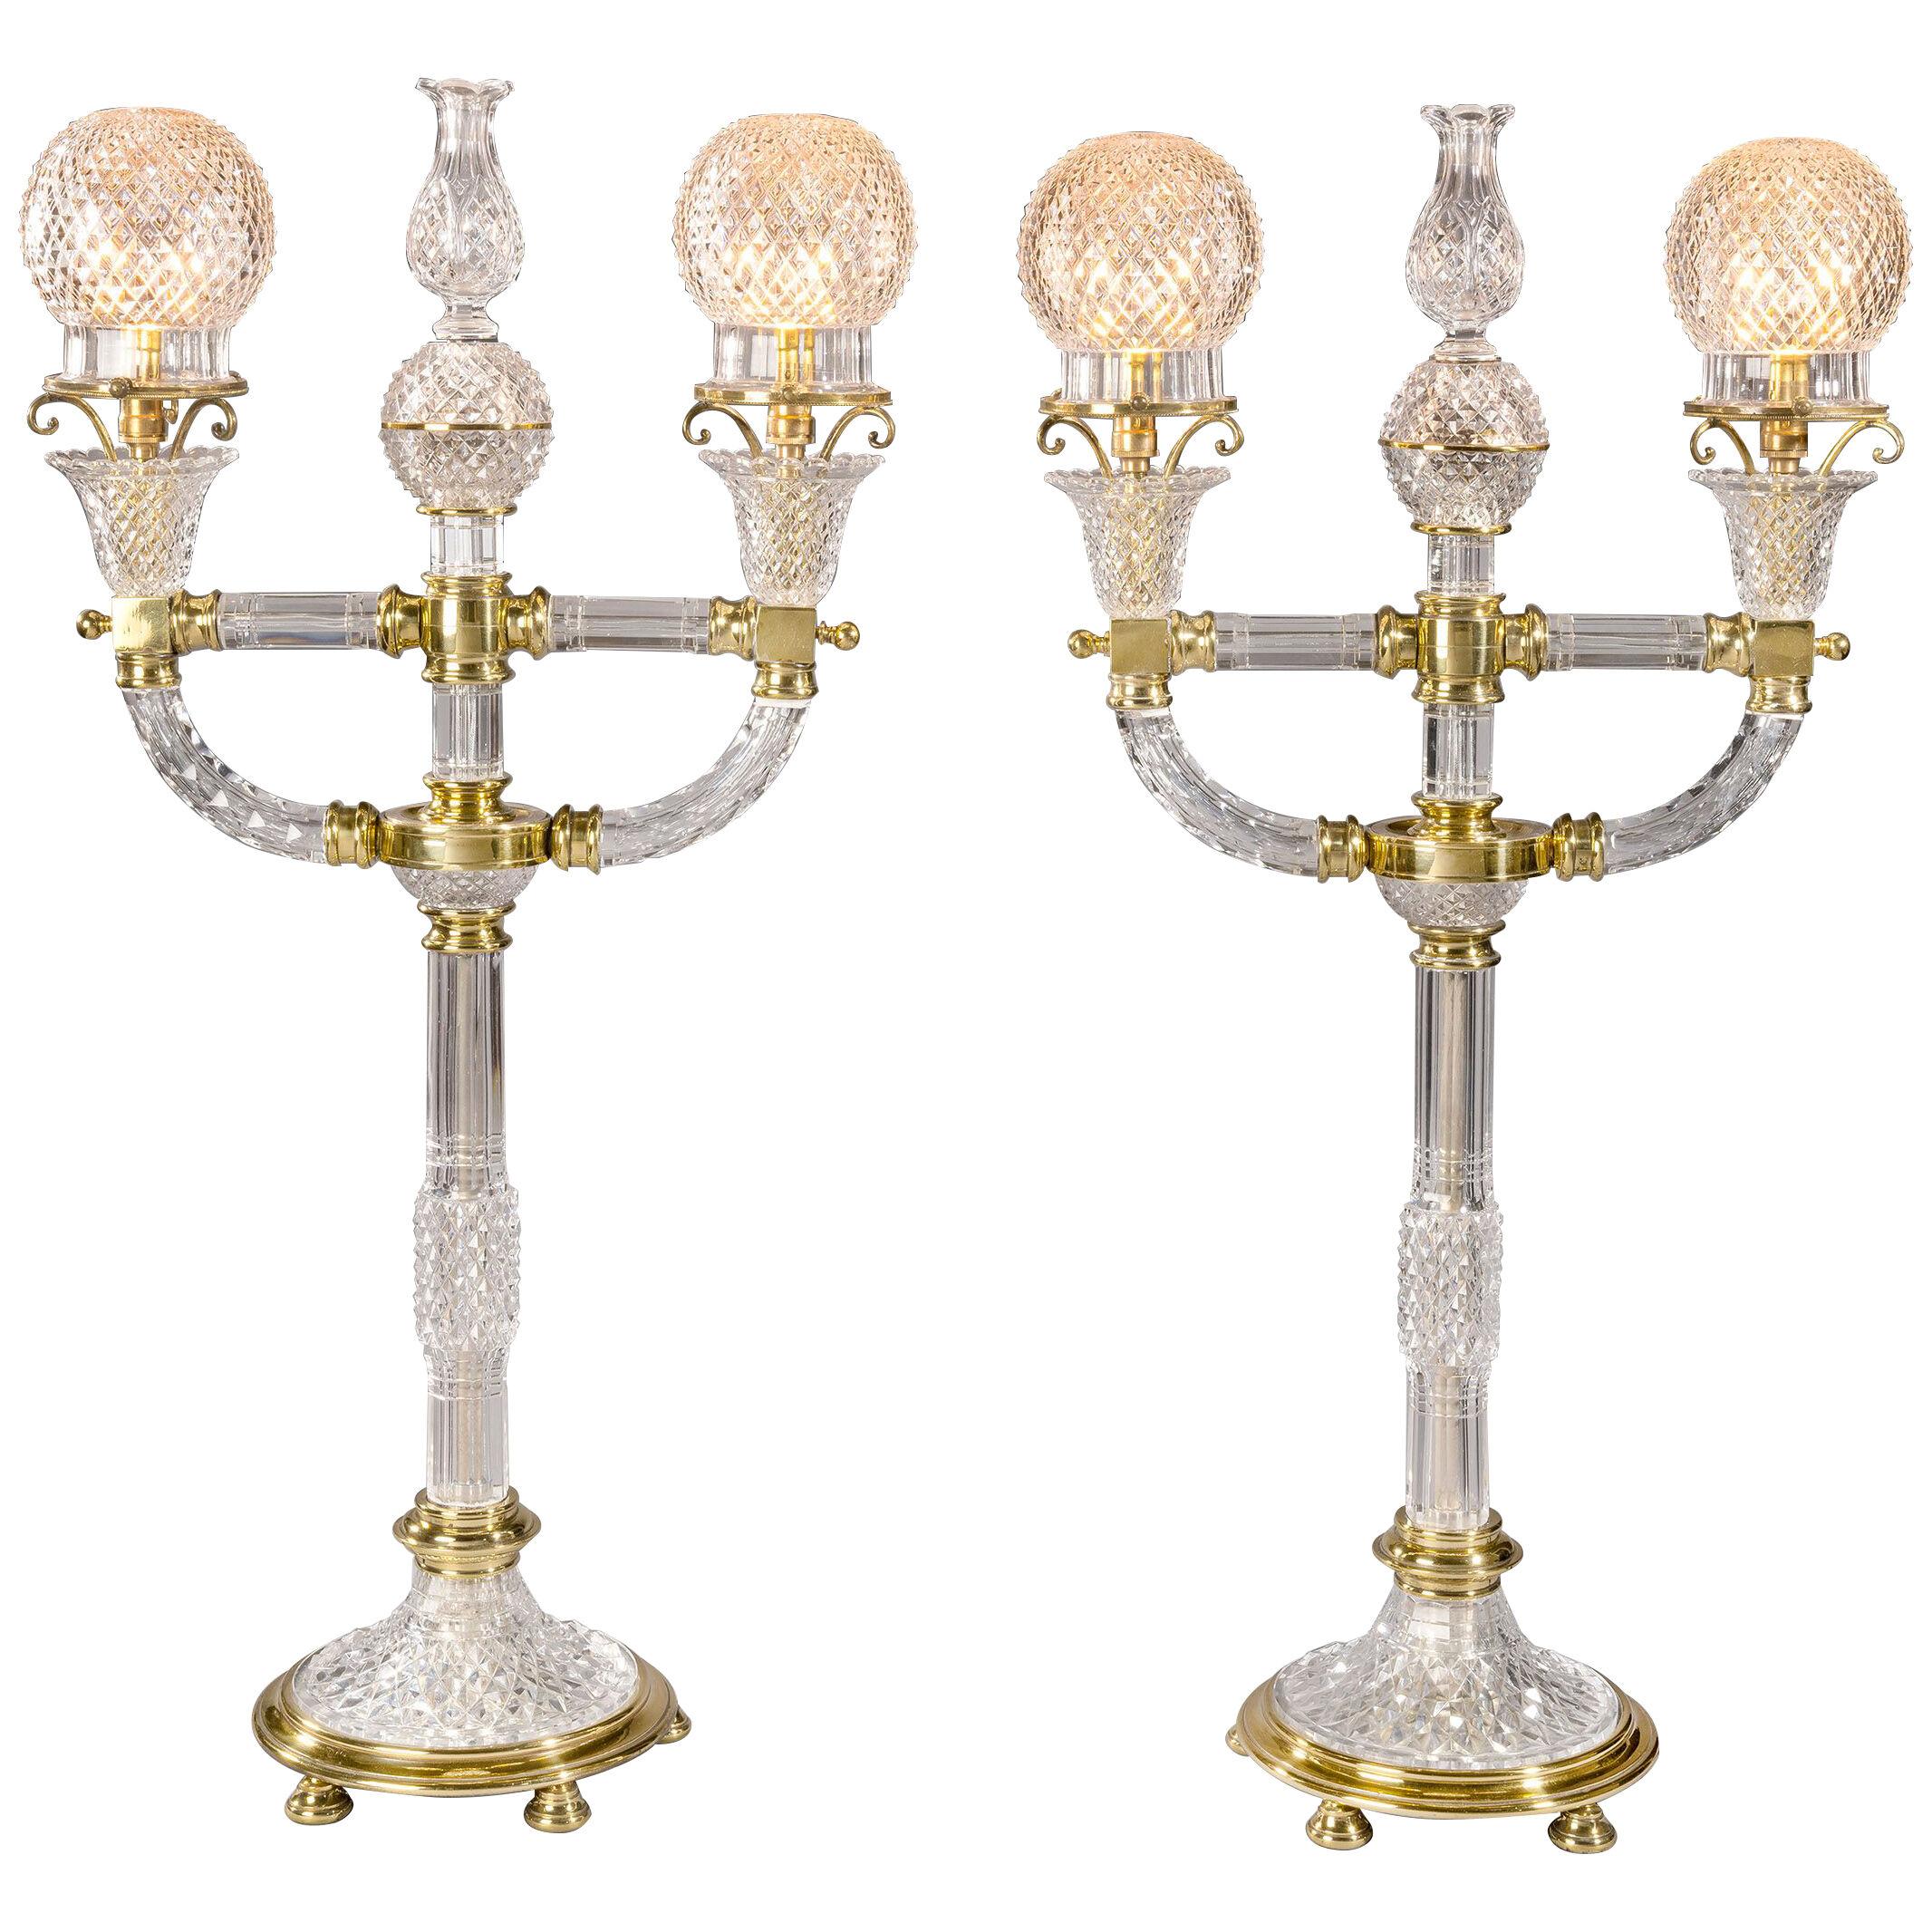 Pair of Osler table lights